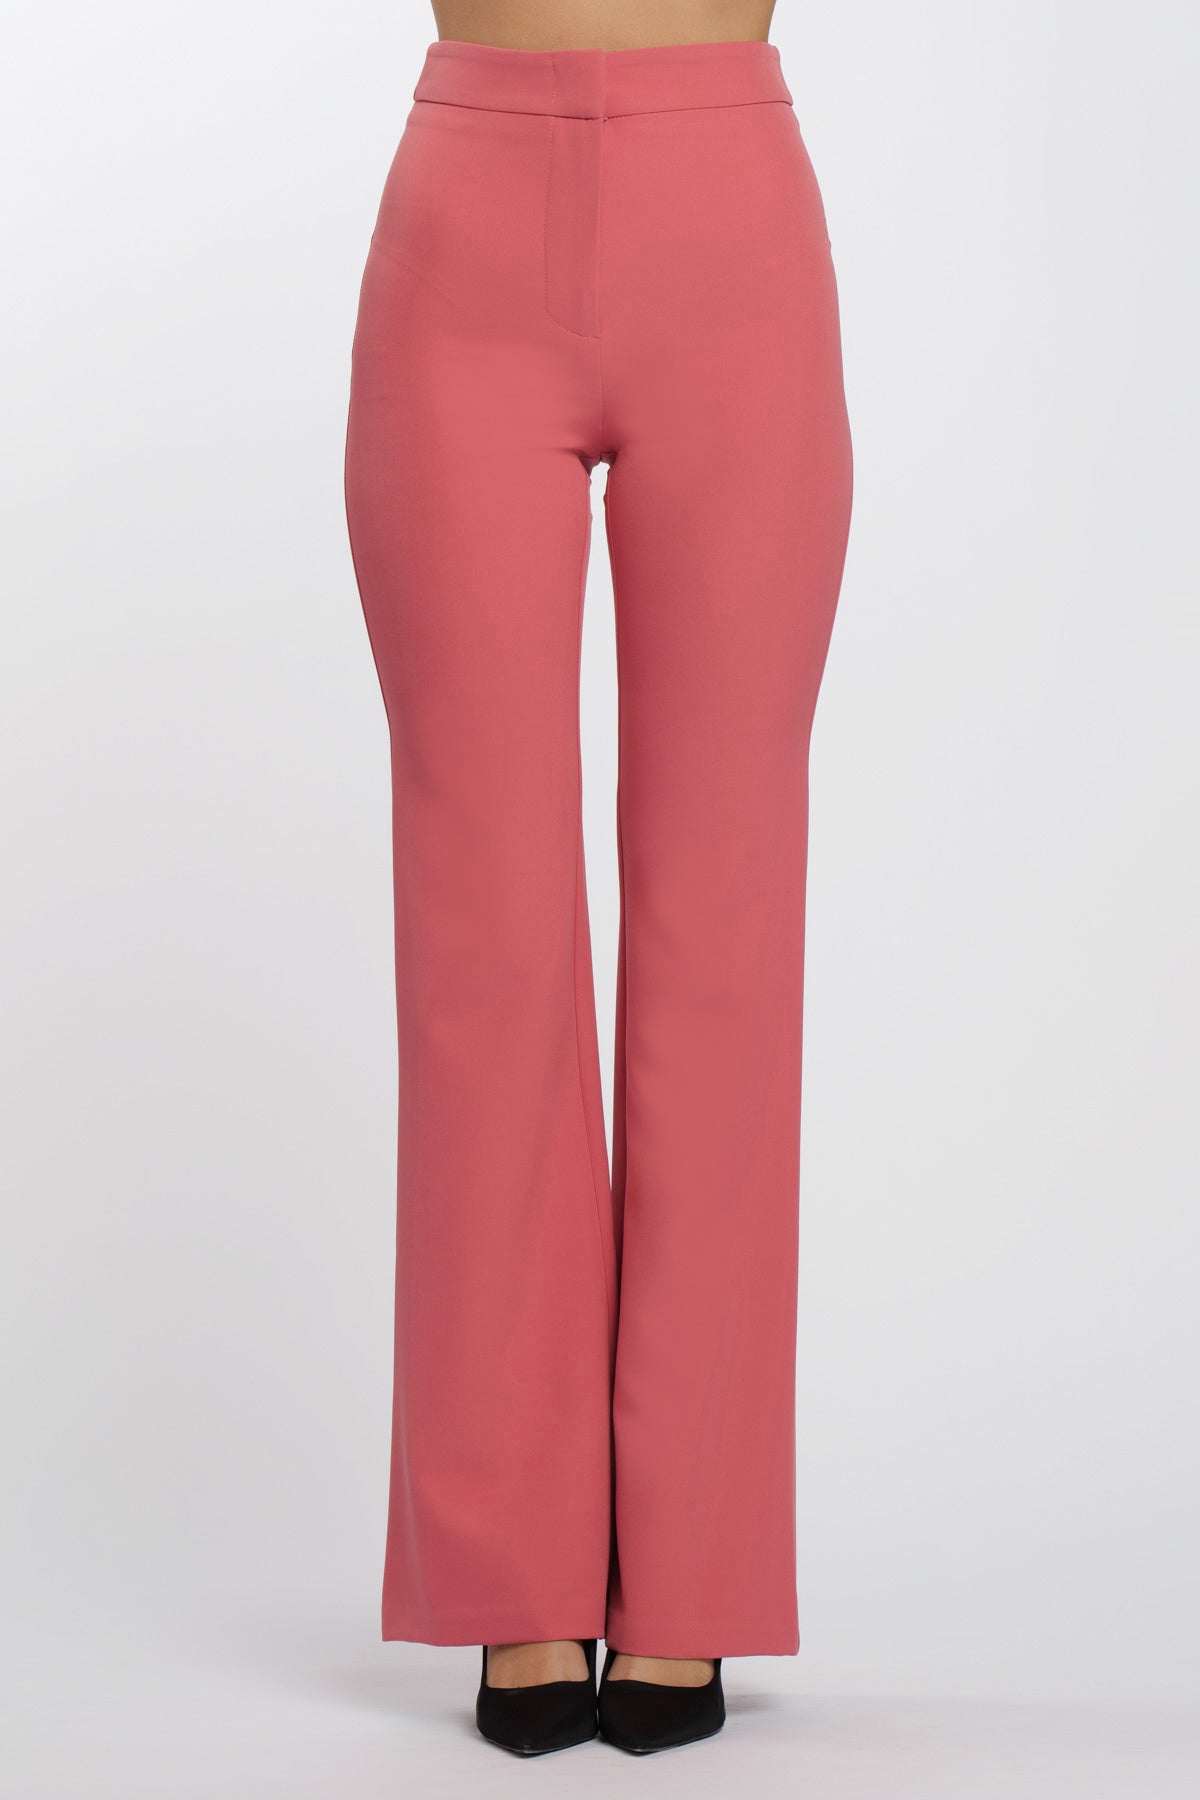  High Waisted Coral Pants